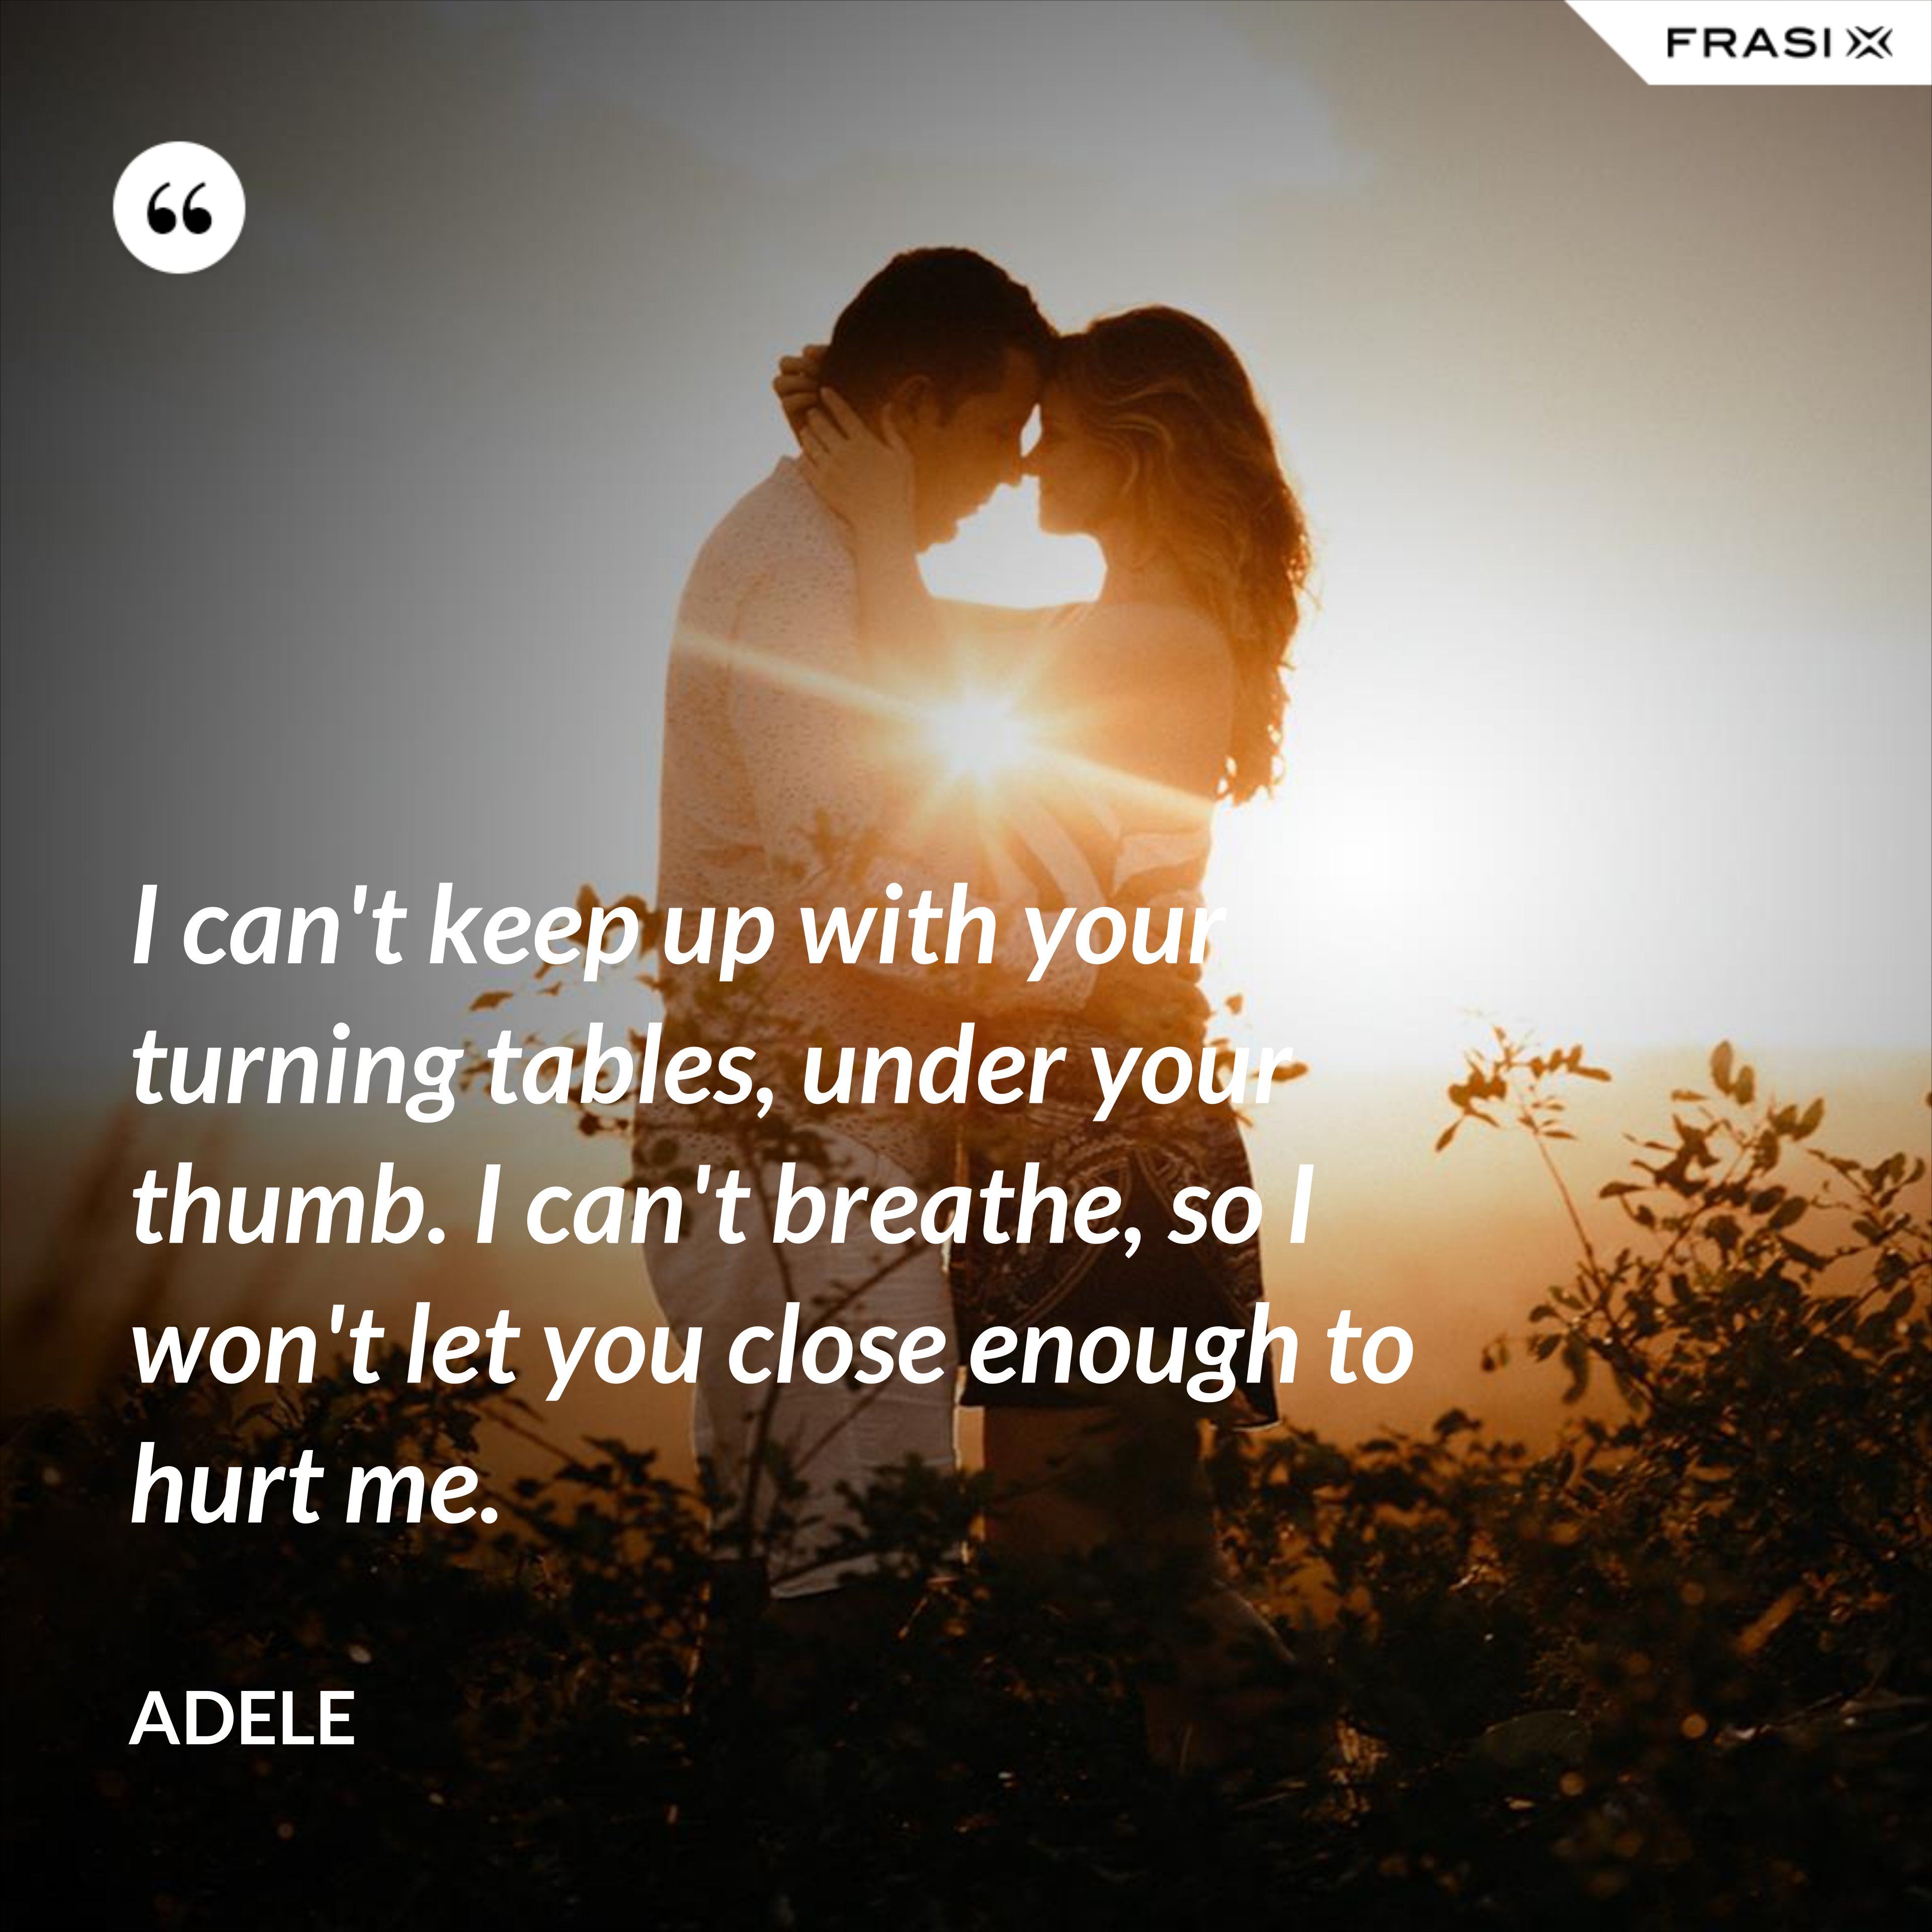 I can't keep up with your turning tables, under your thumb. I can't breathe, so I won't let you close enough to hurt me. - Adele